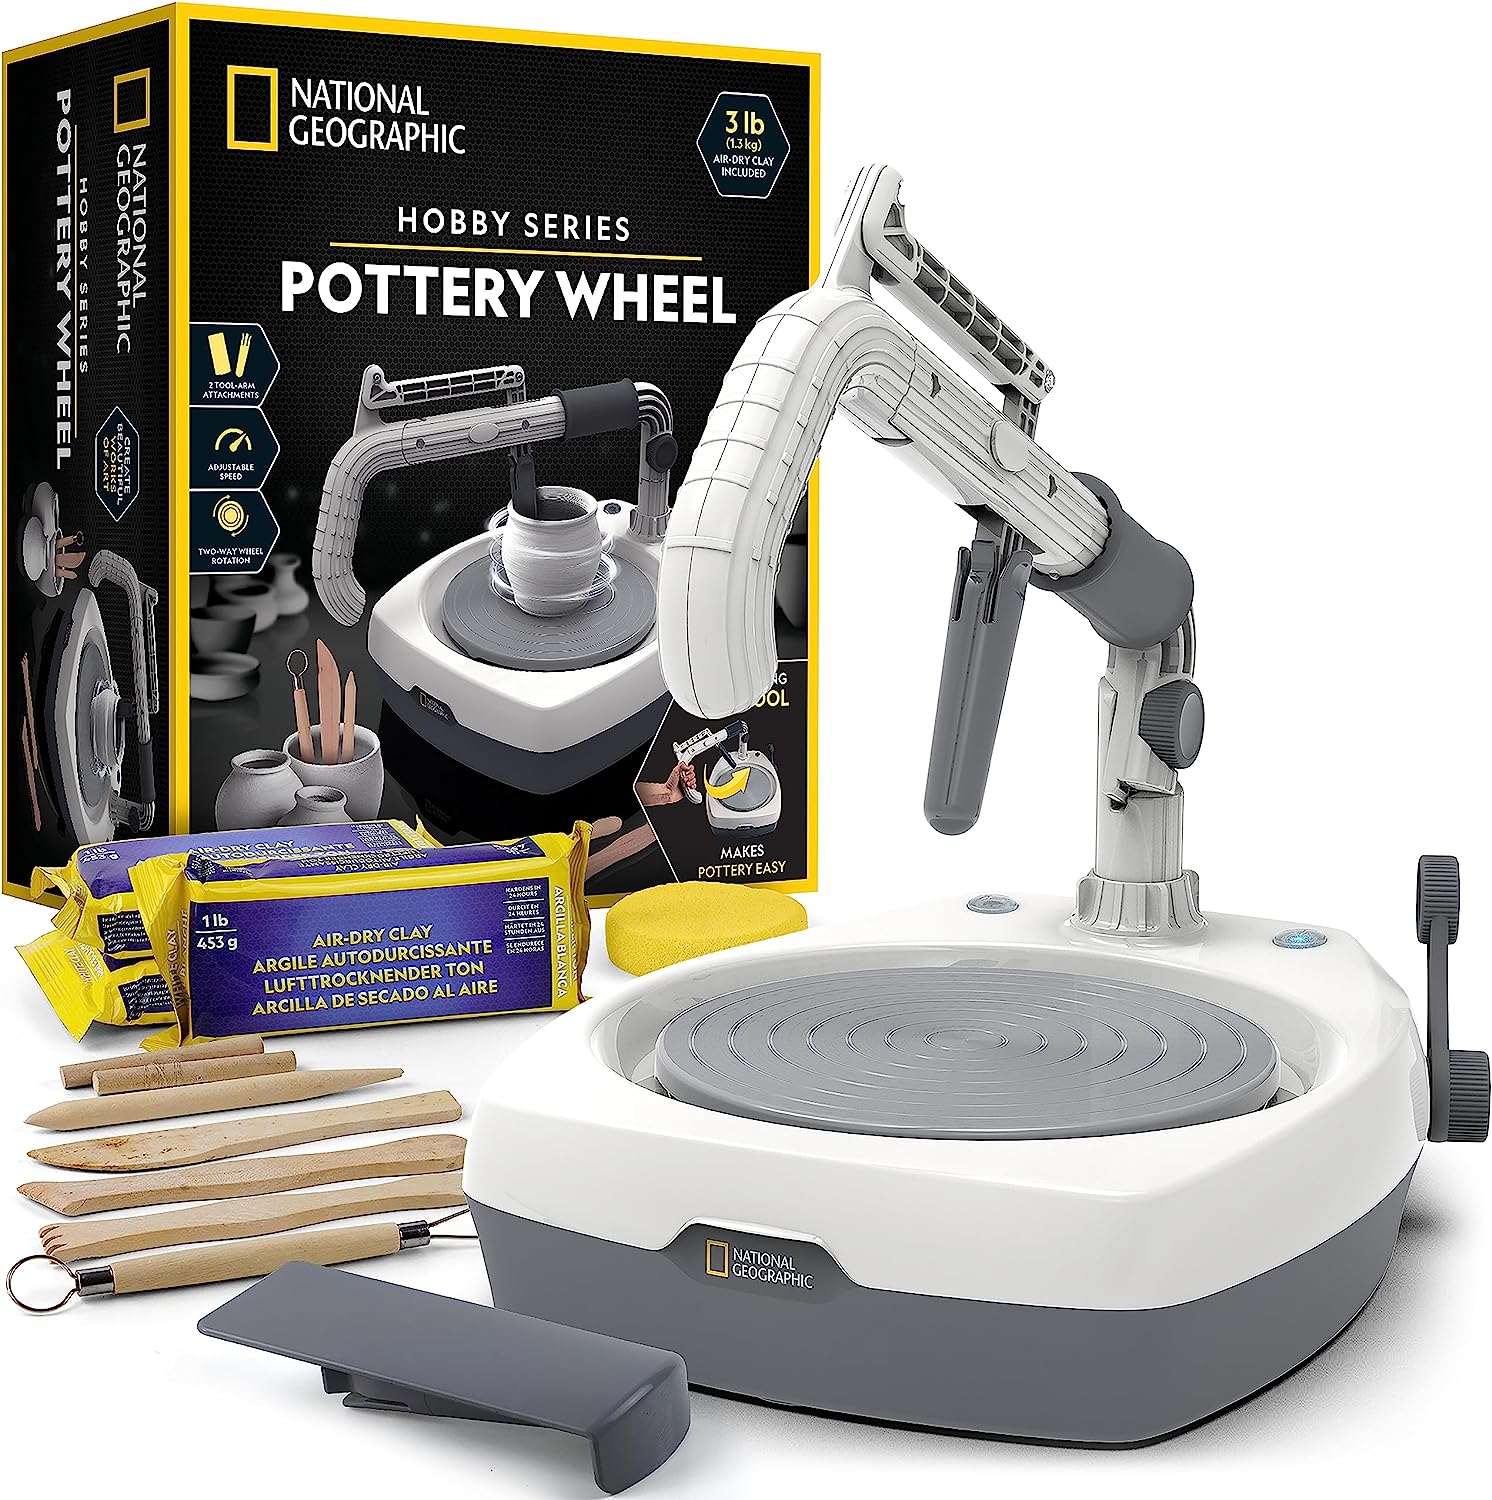 NATIONAL GEOGRAPHIC Hobby Pottery Wheel